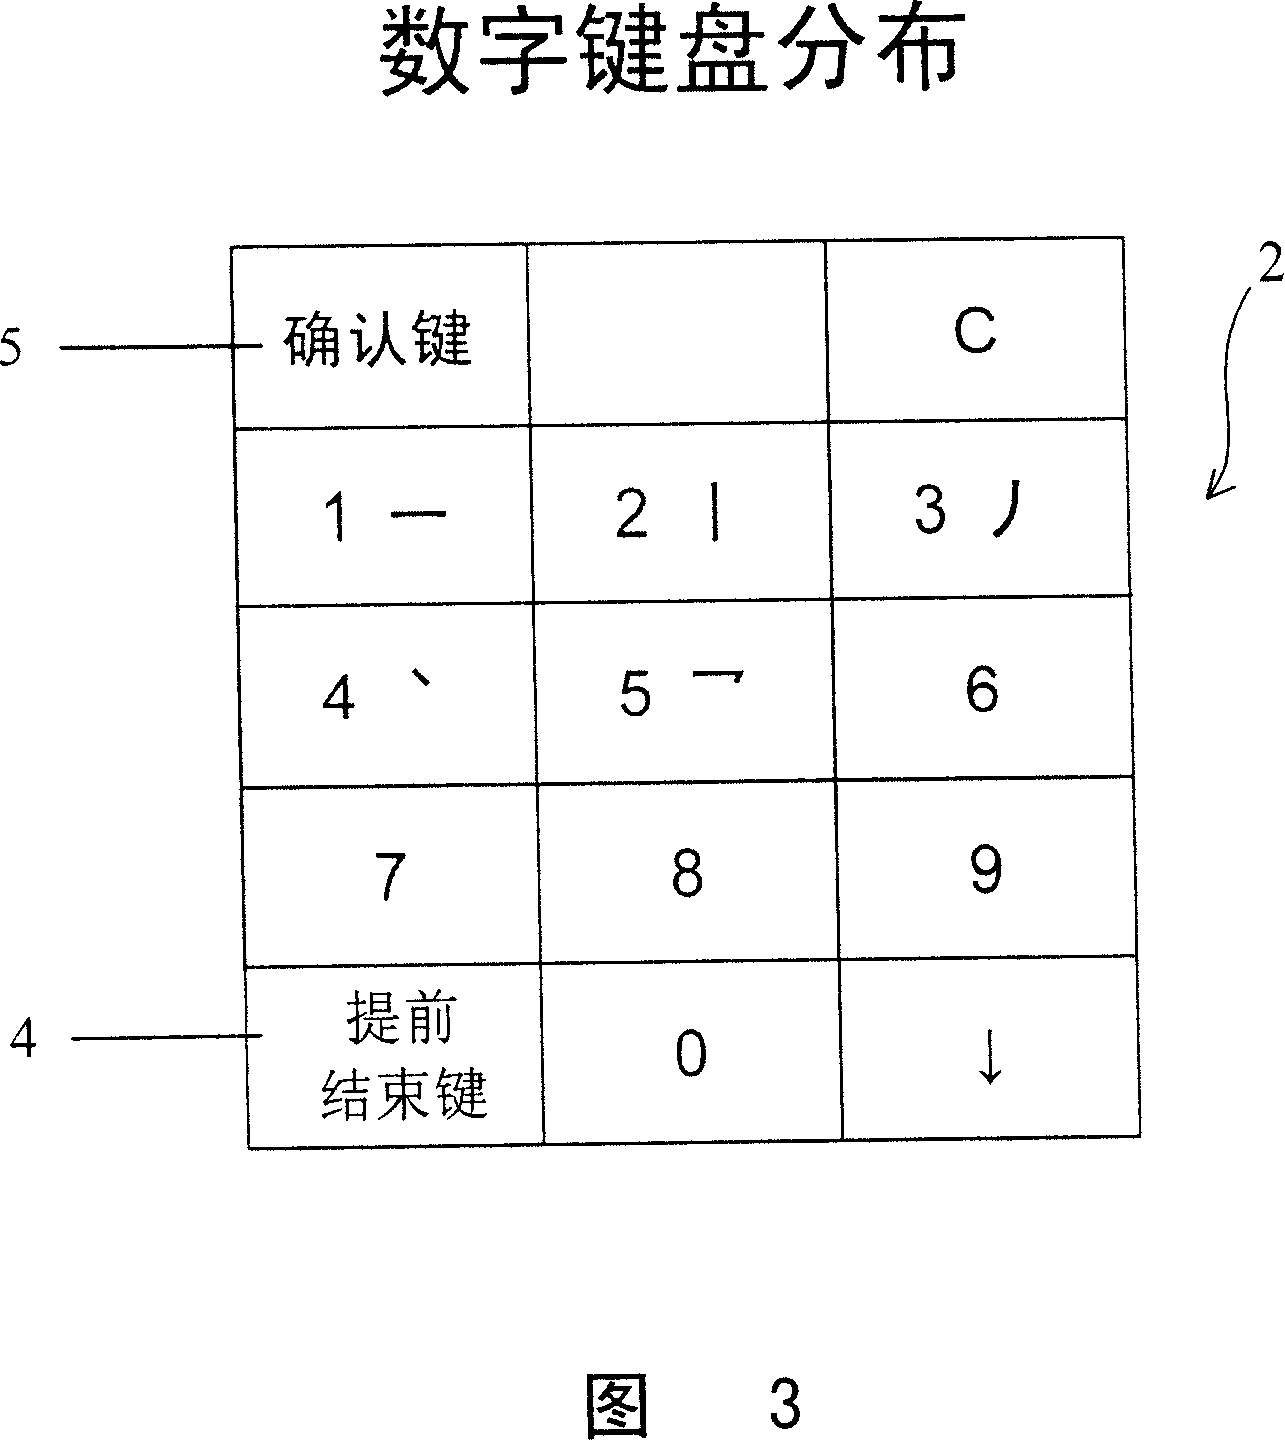 Chinese character image input method for digital electrical apparatus